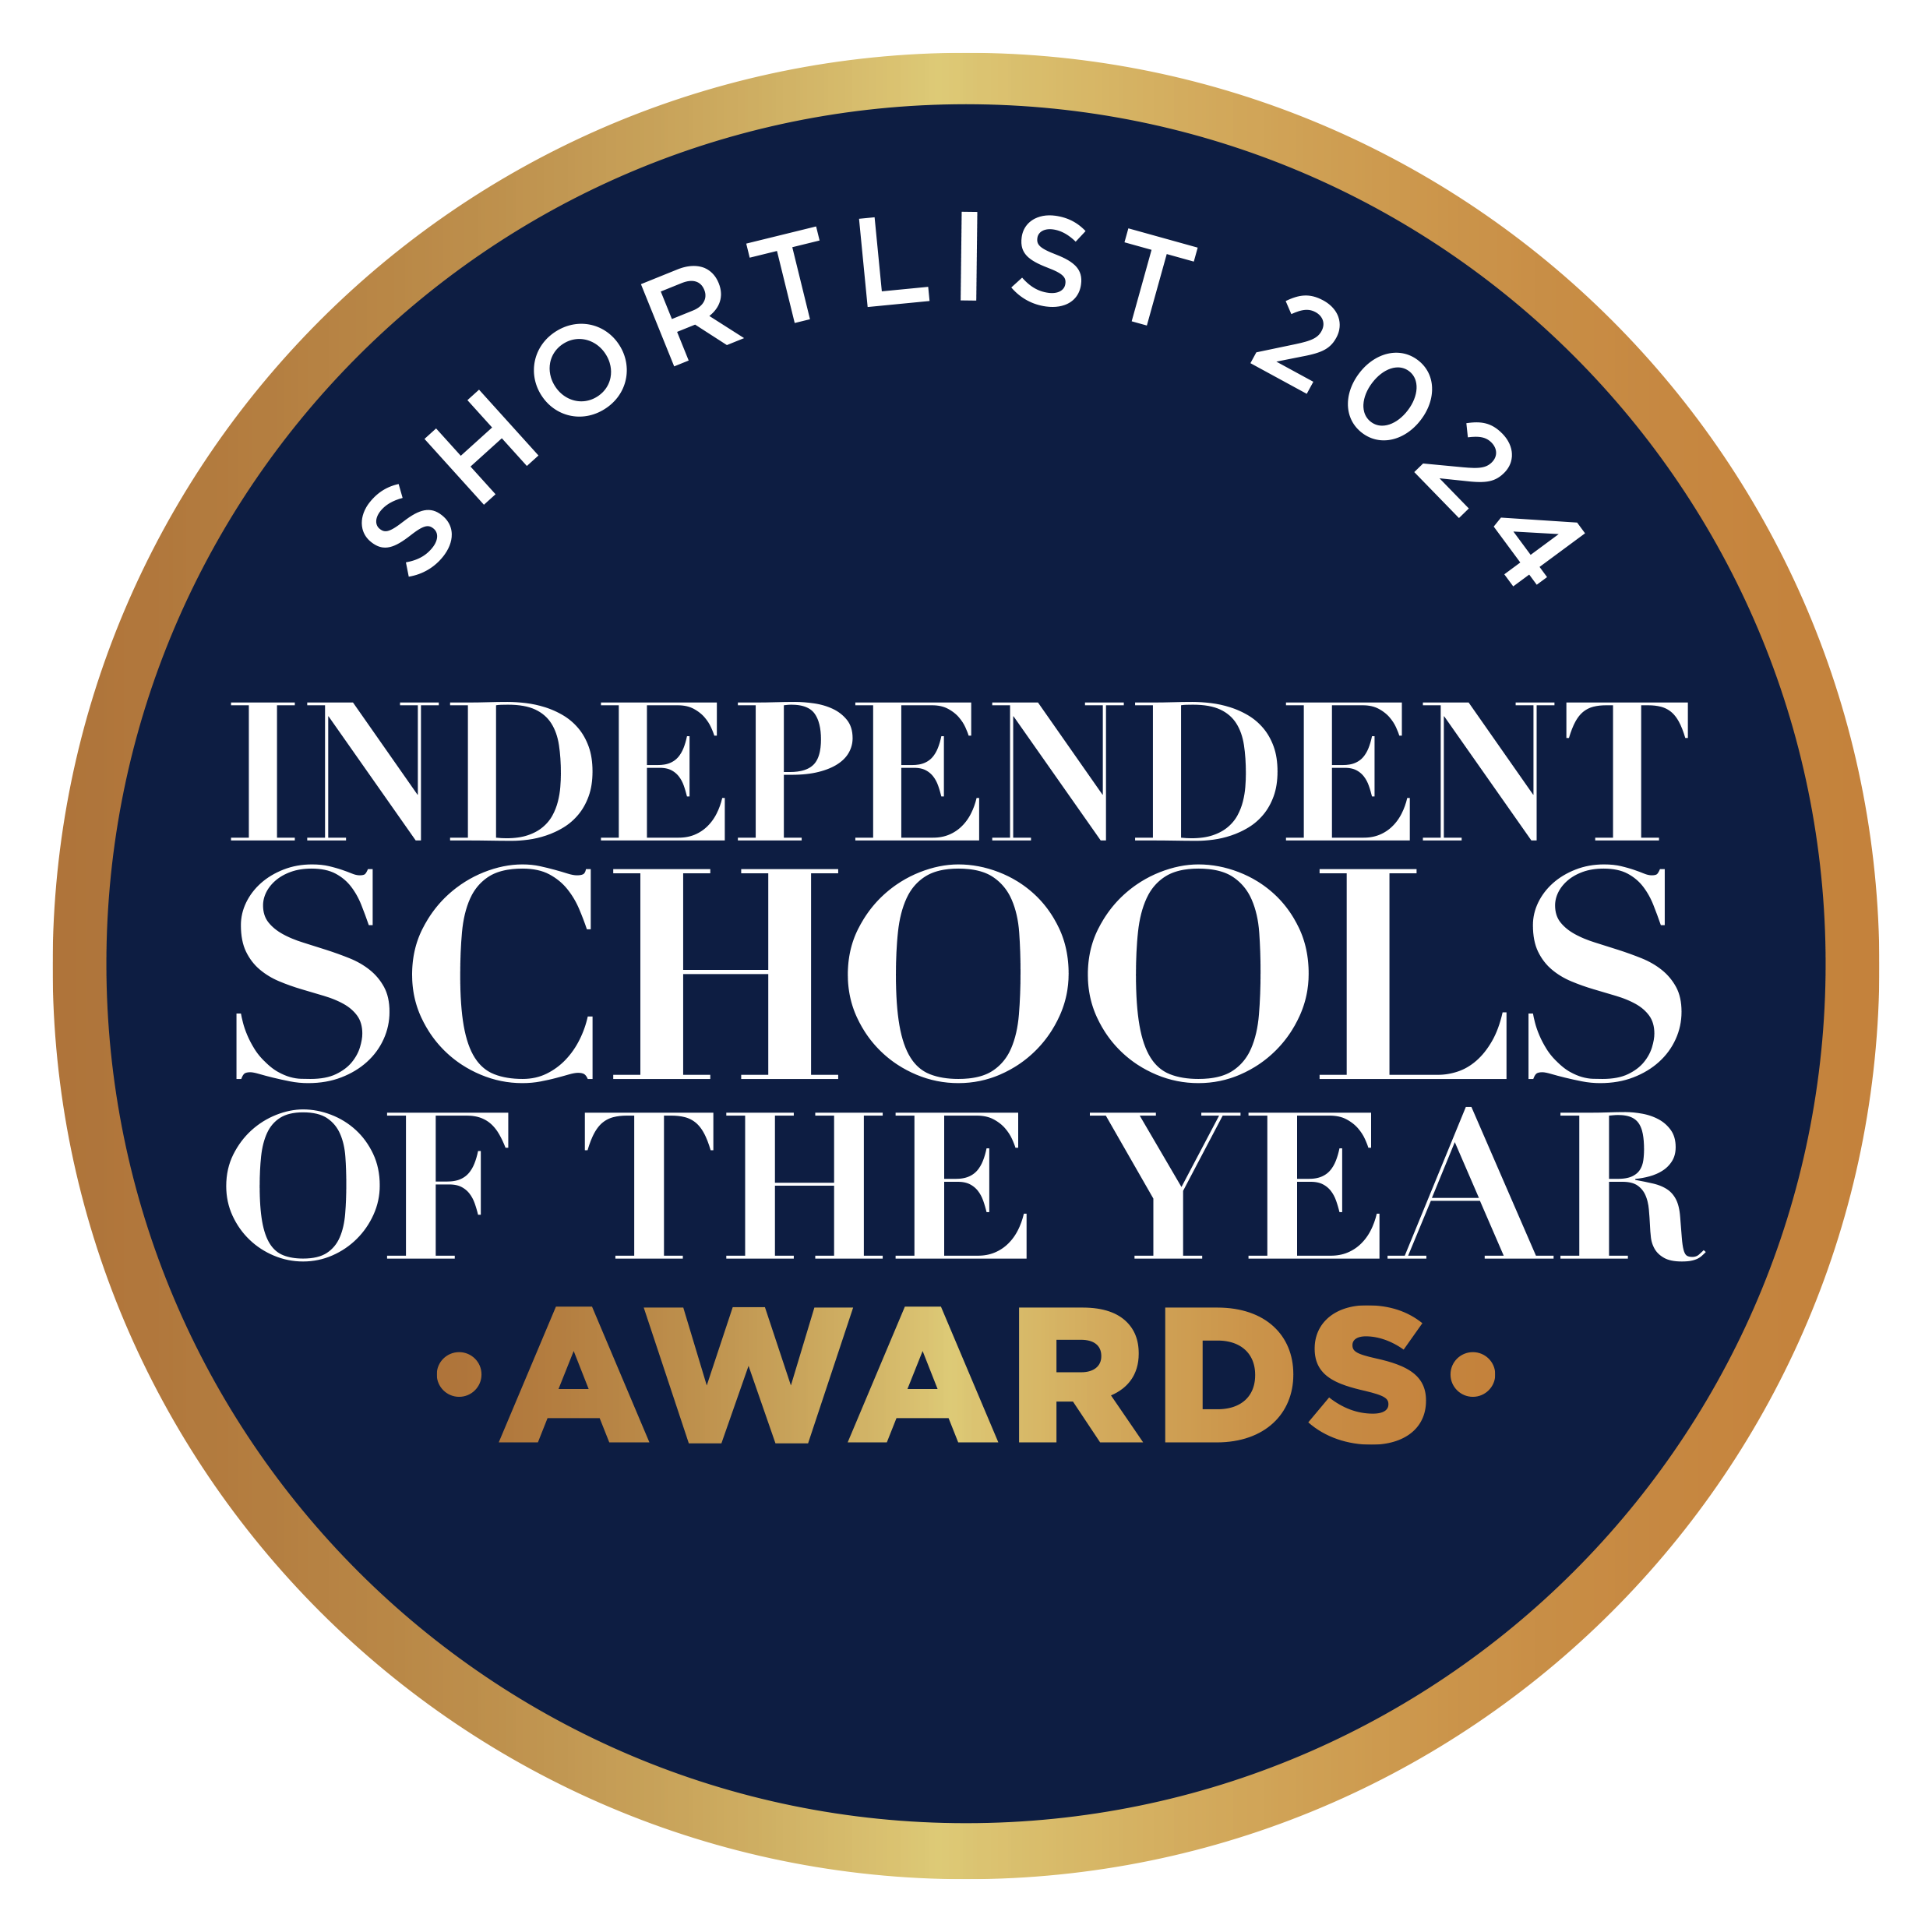 Independent Schools of the year